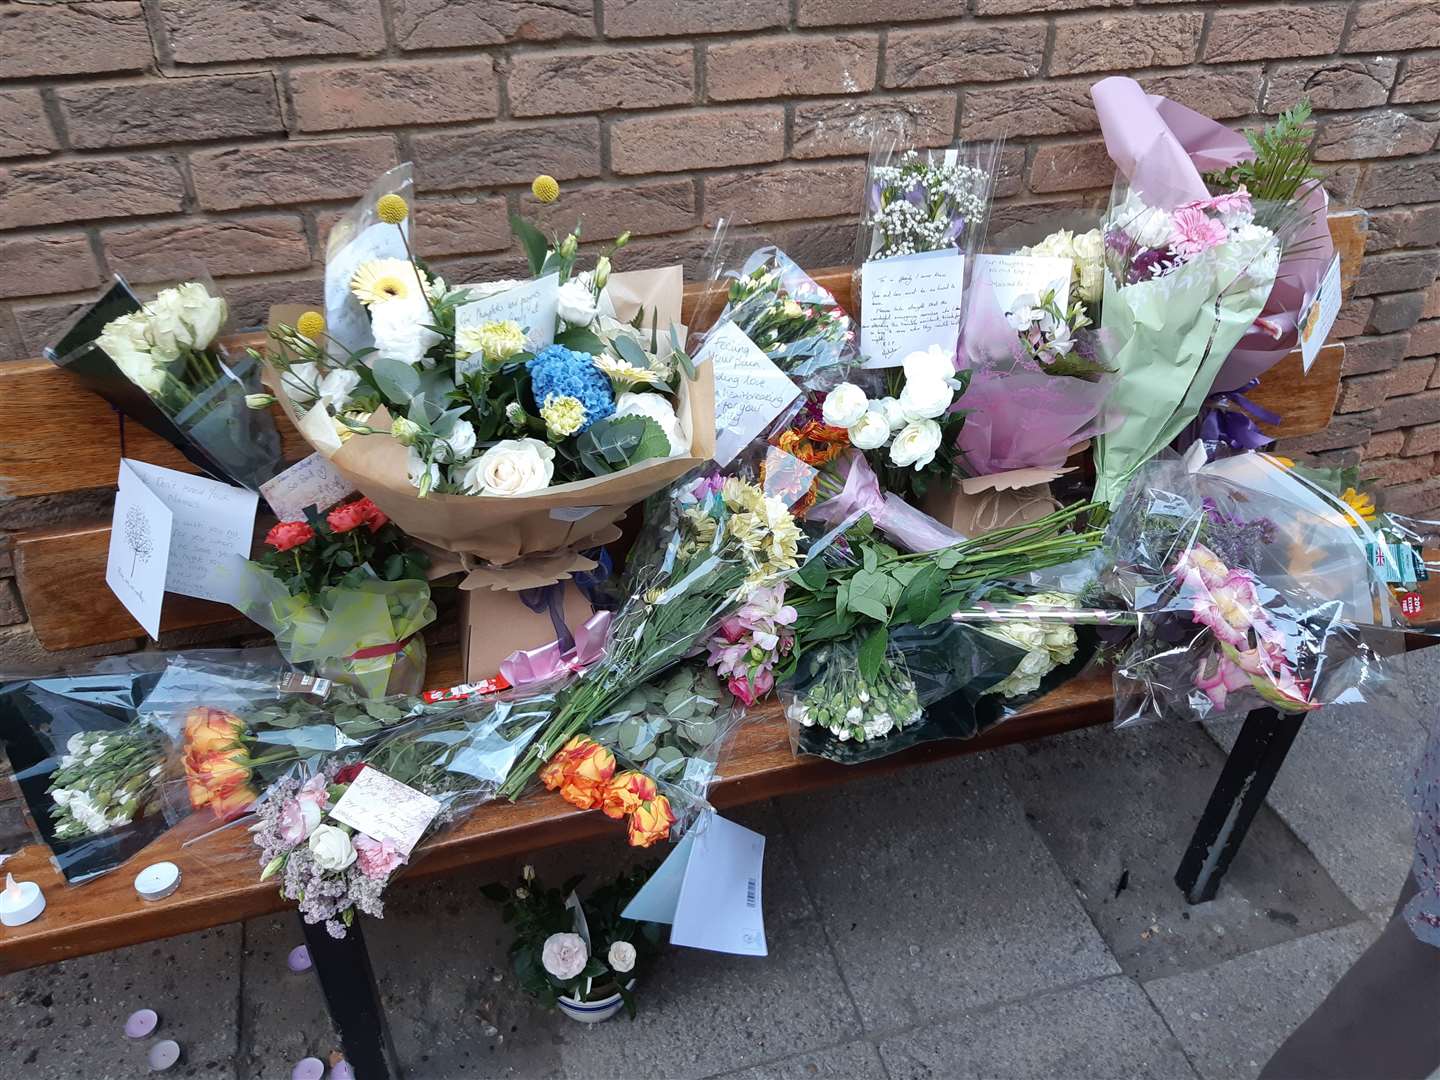 Floral tributes at the scene of the tragedy